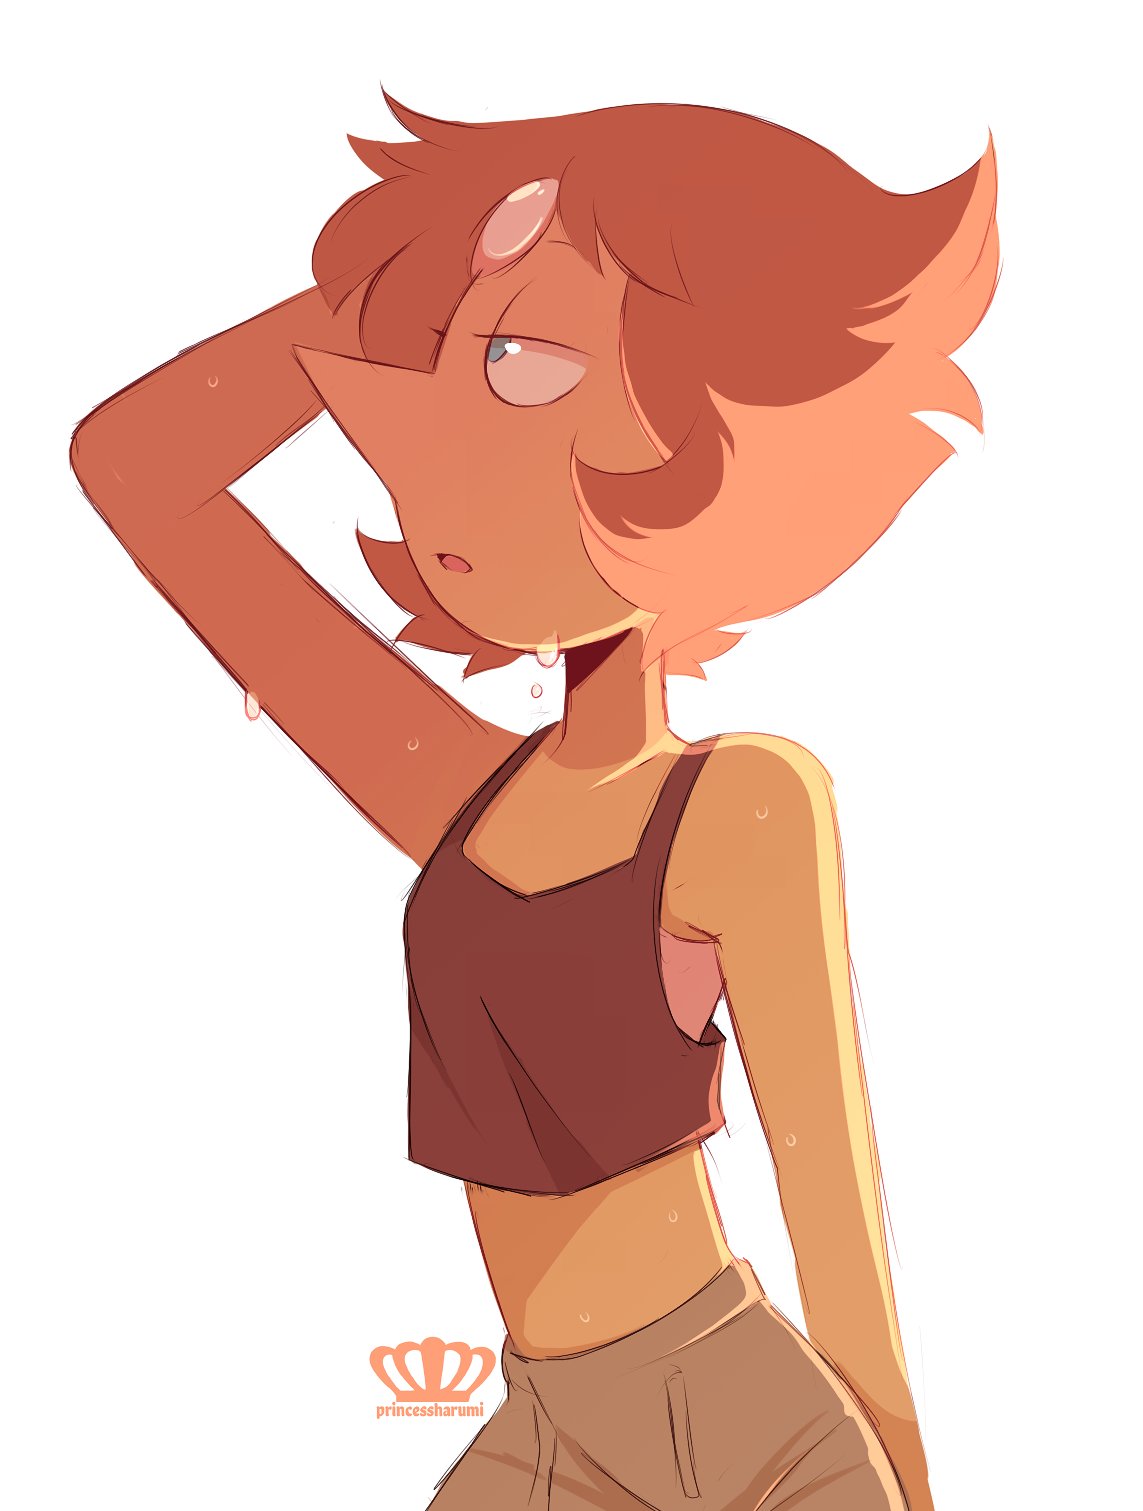 “15 min pearl warm up doodle
its been so hot these days”